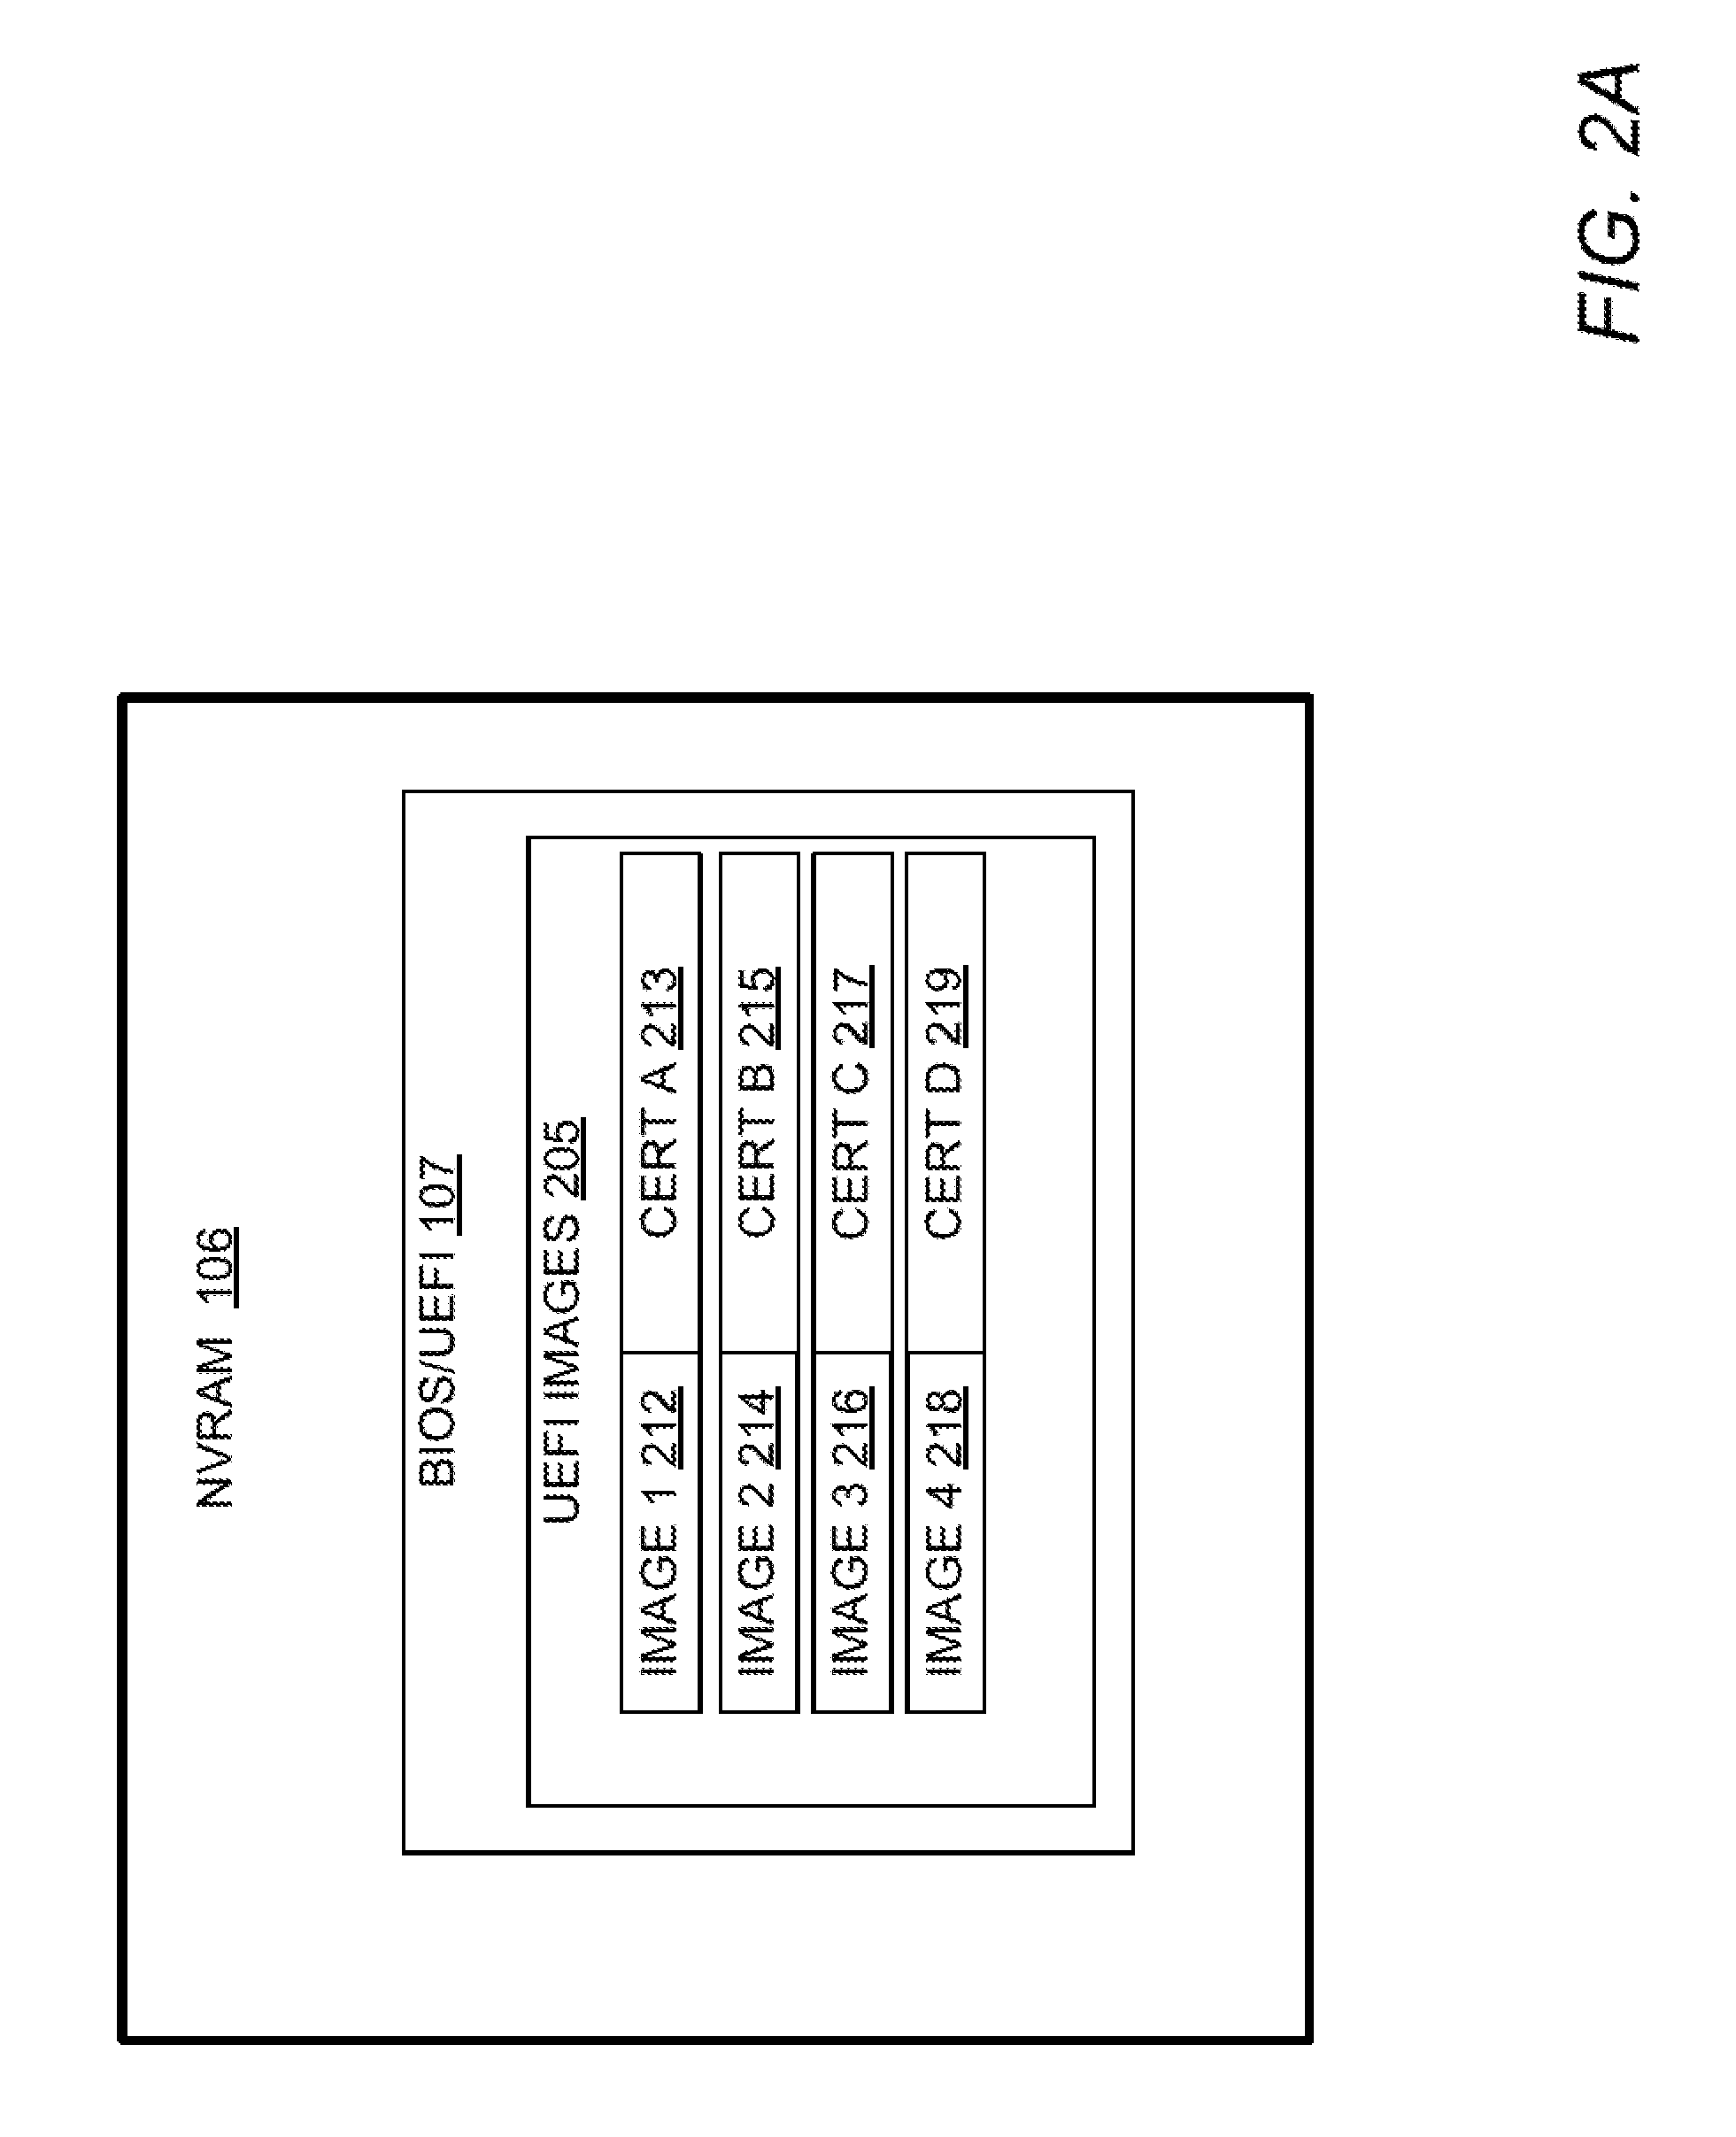 Method for optimizing boot time of an information handling system